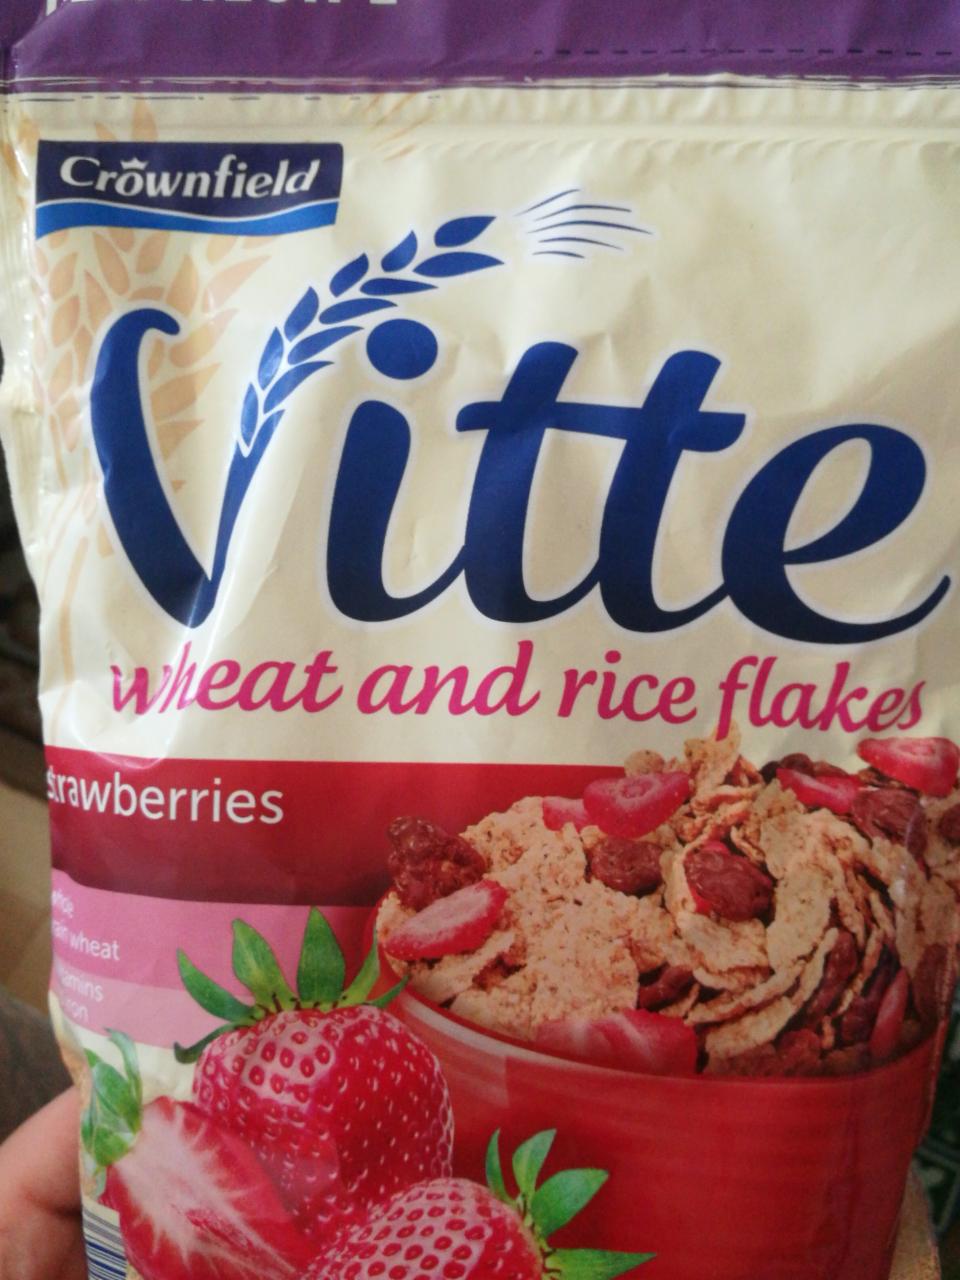 Képek - Vitte wheat and rice flakes Epres Crownfield